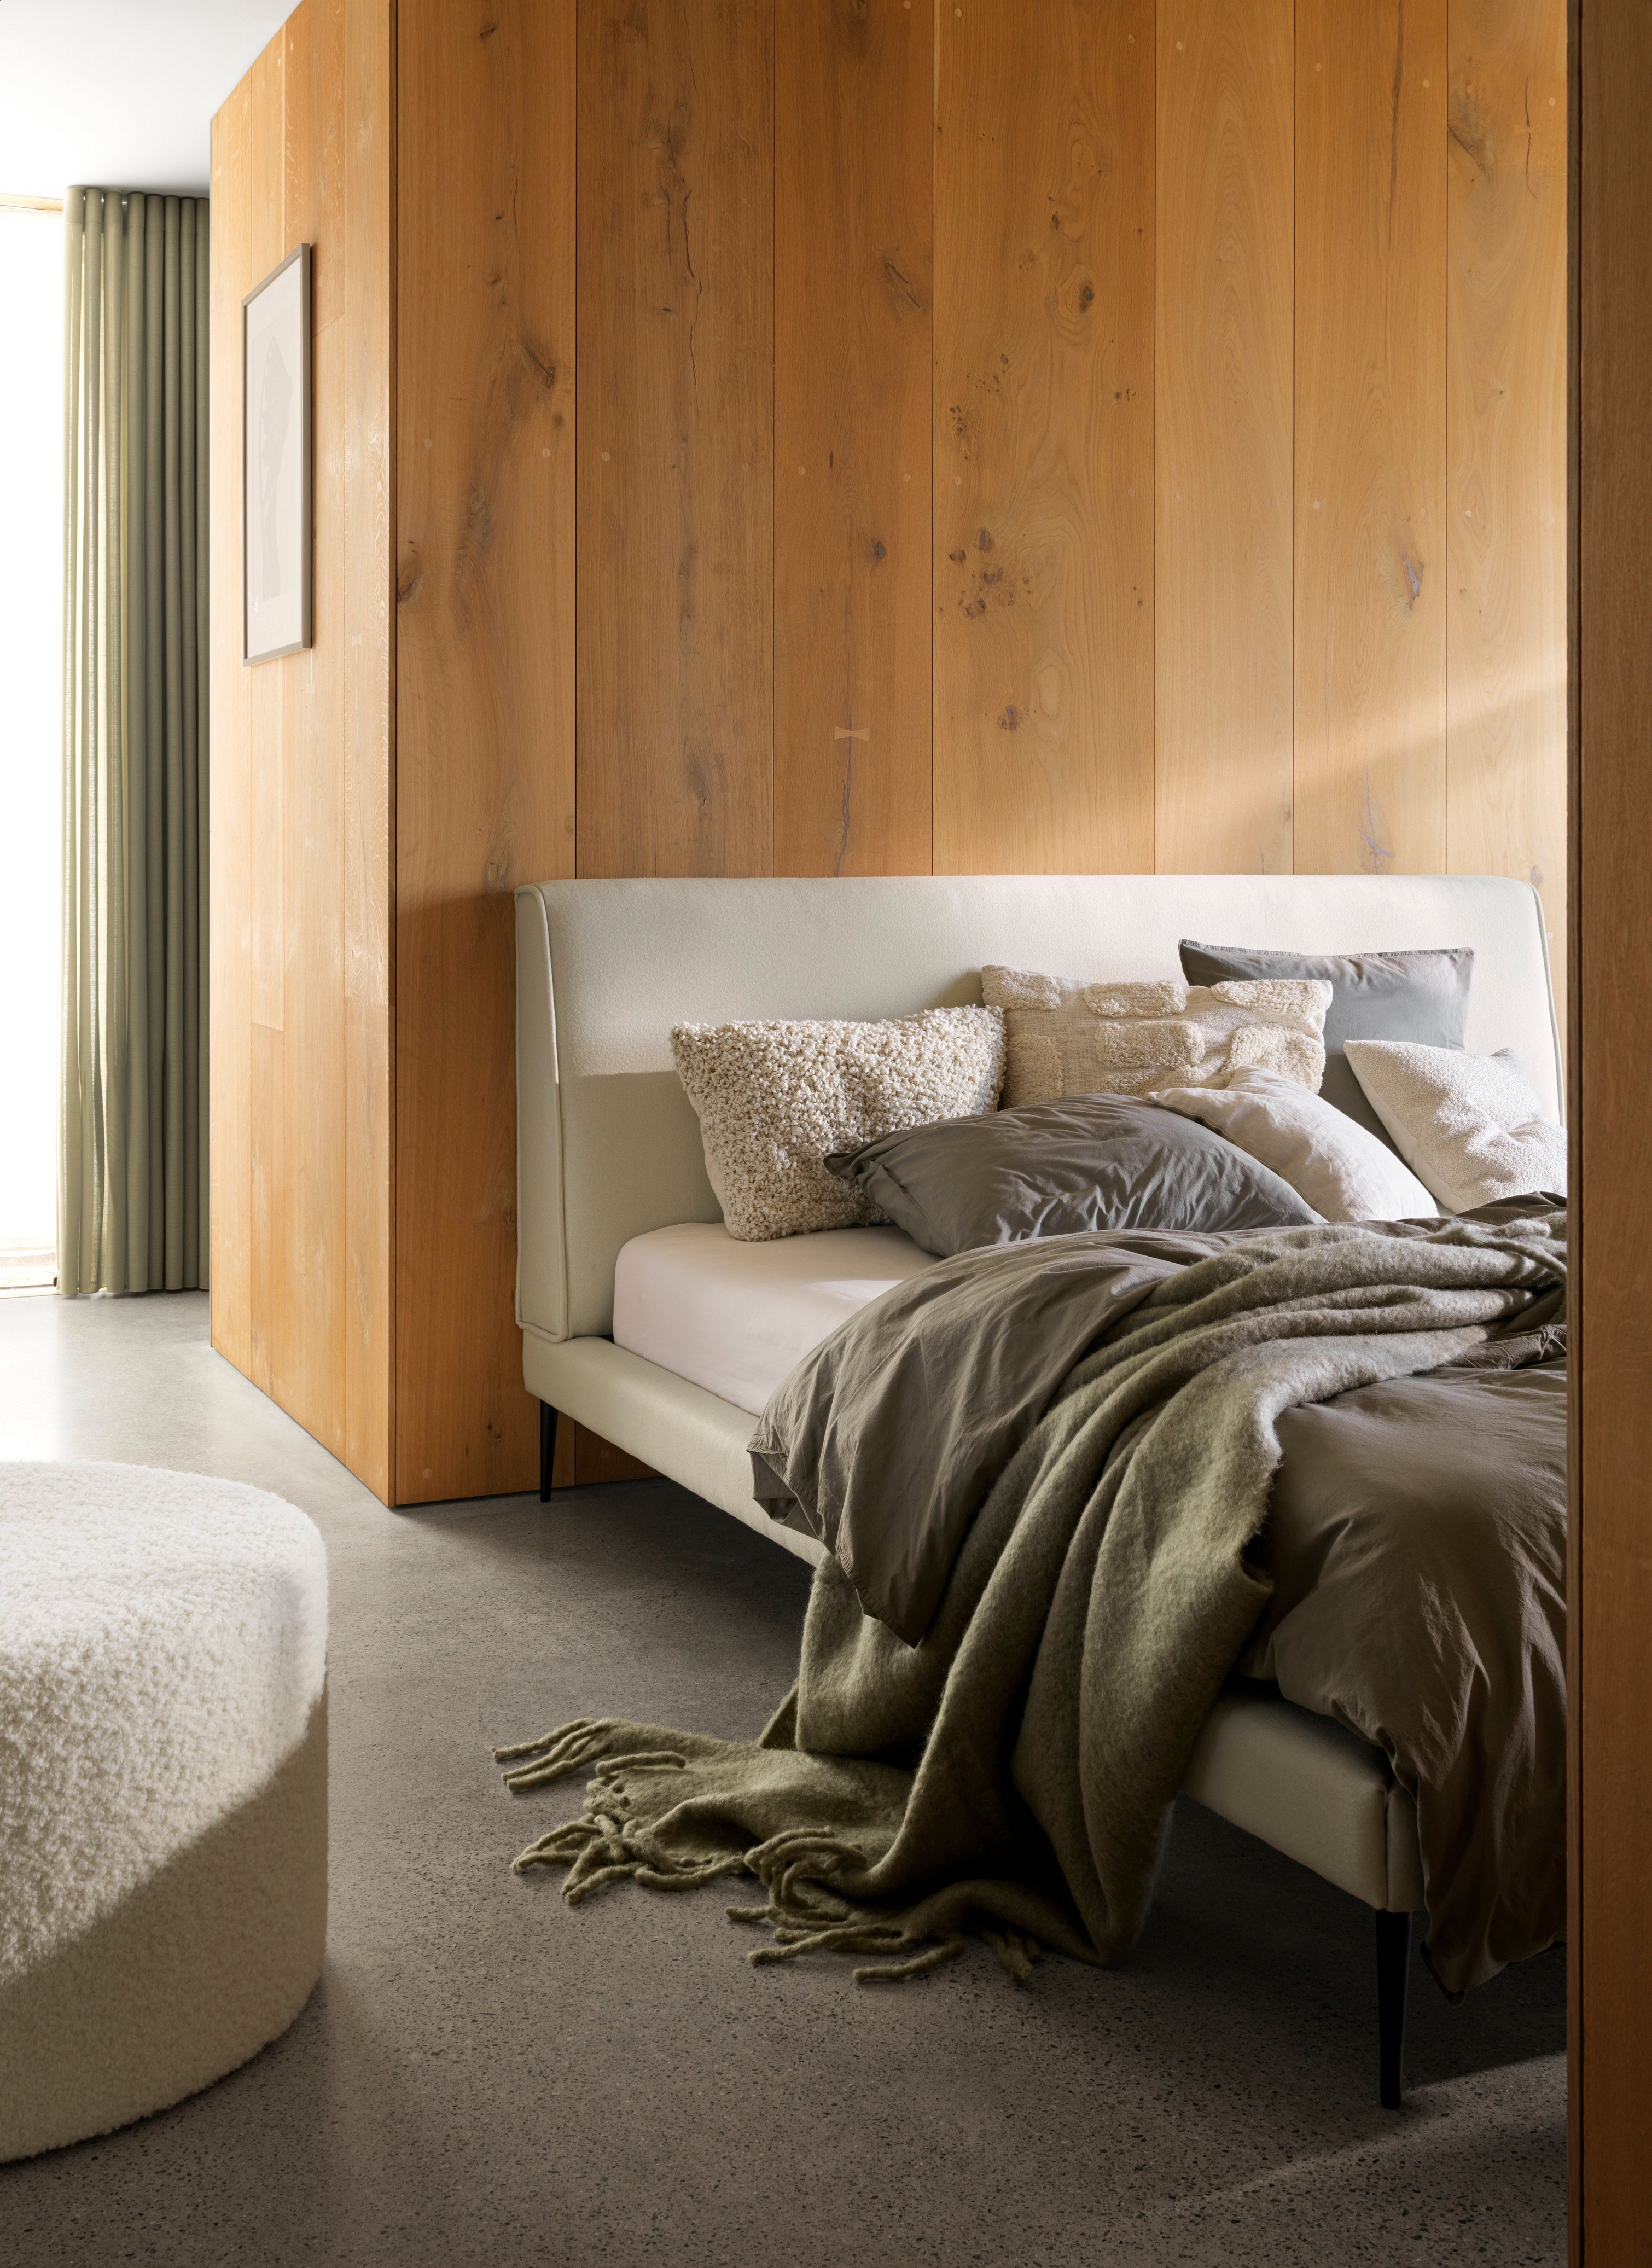 Cozy bed with plush throws and pillows against a wooden wall and soft lighting.